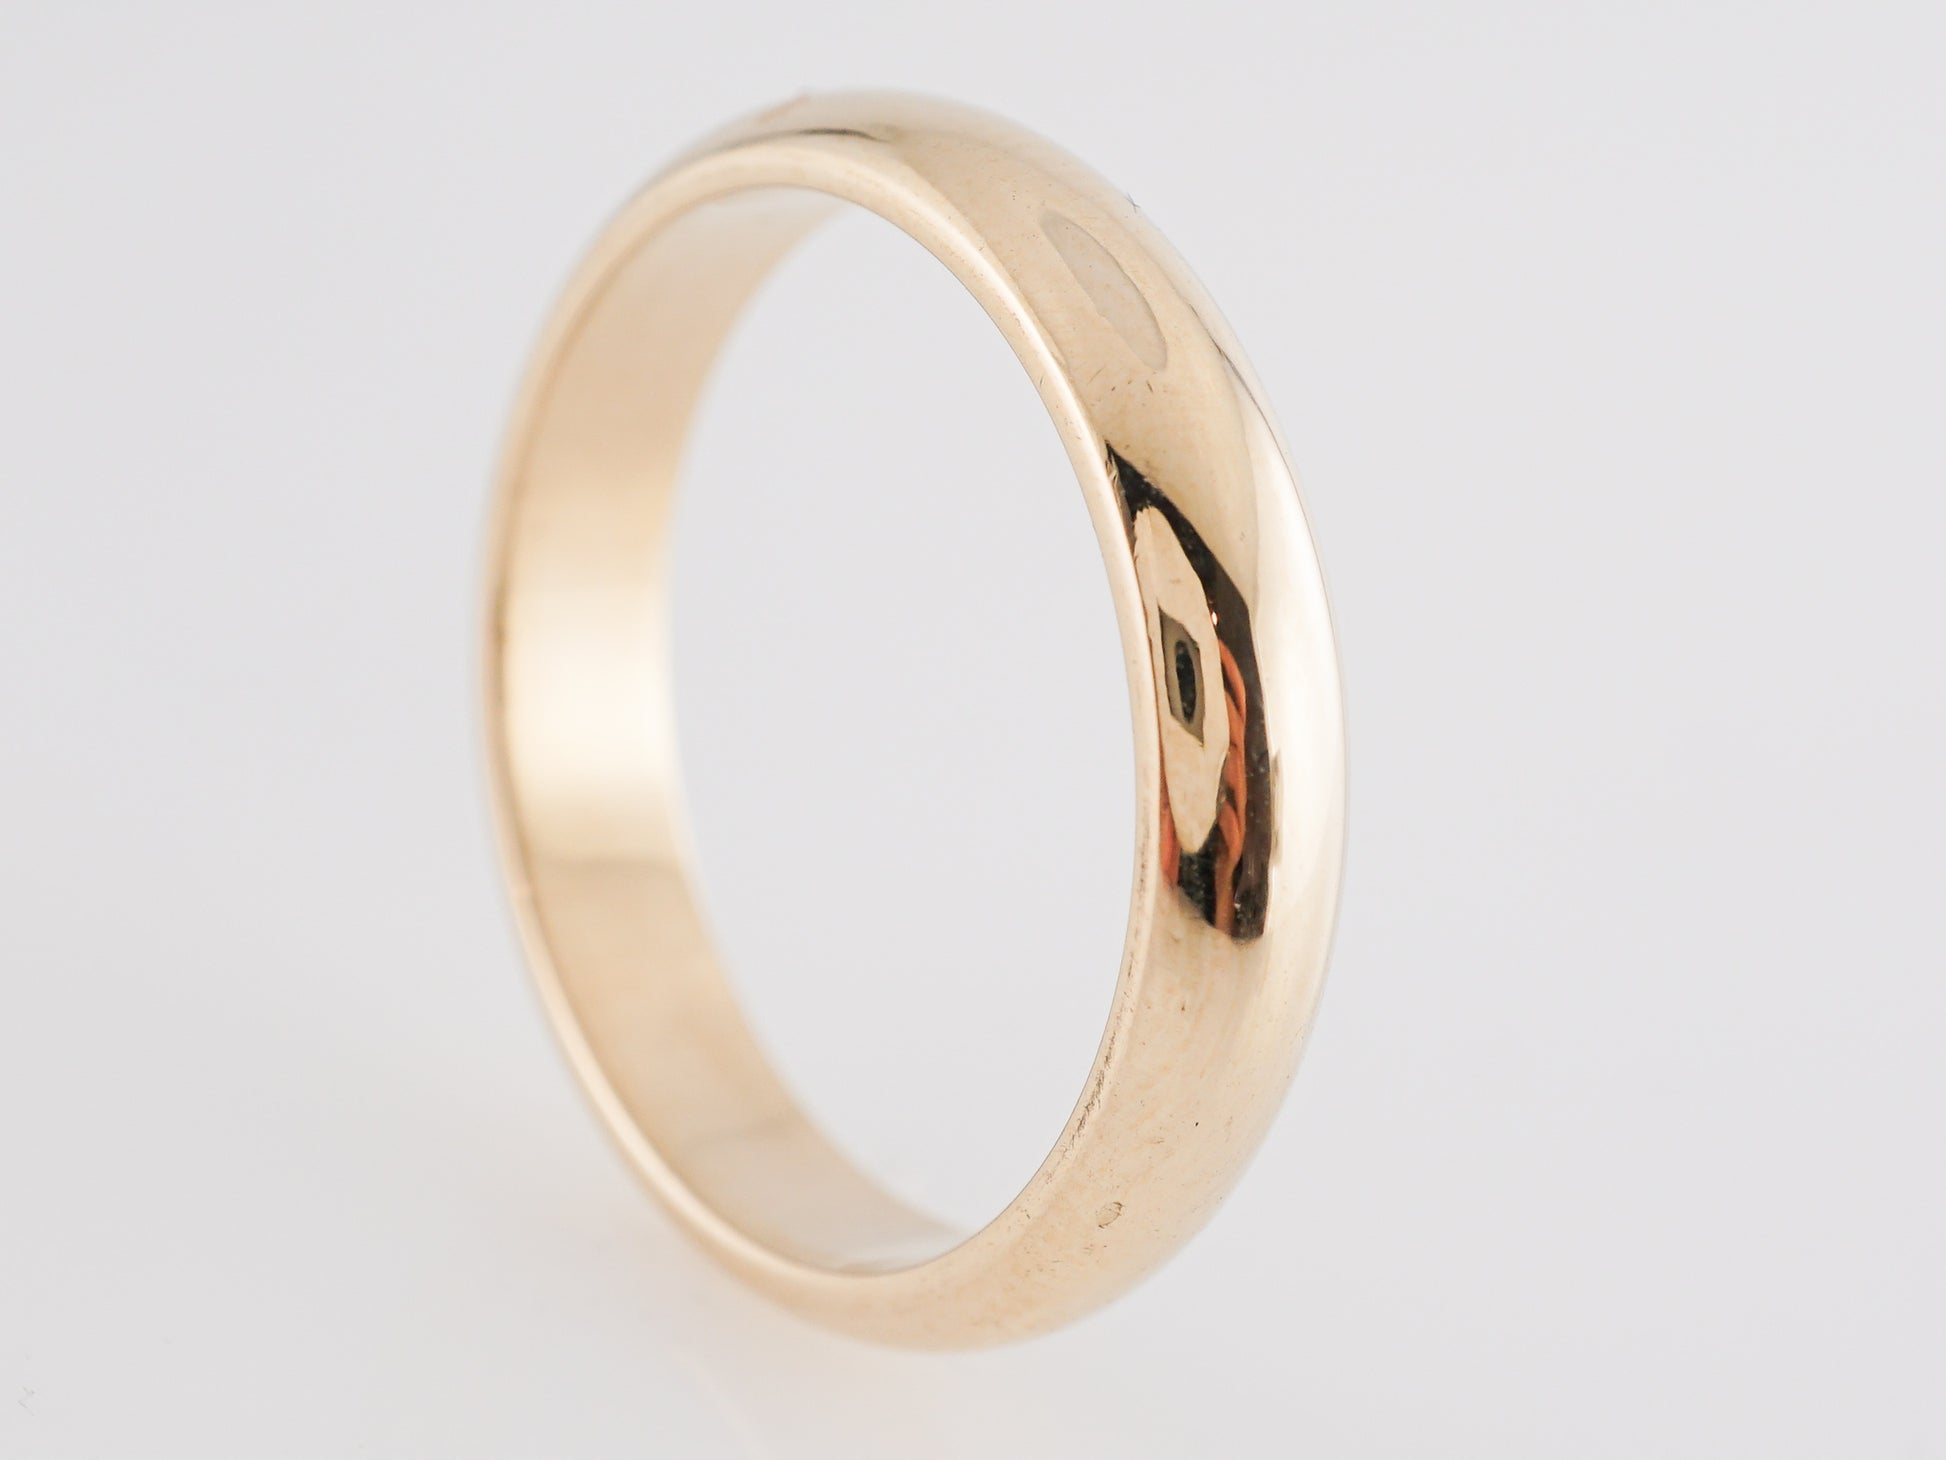 4mm Simple Wedding Band in 14k Yellow GoldComposition: Platinum Ring Size: 7.75 Total Gram Weight: 3.7 g Inscription: 14k
      